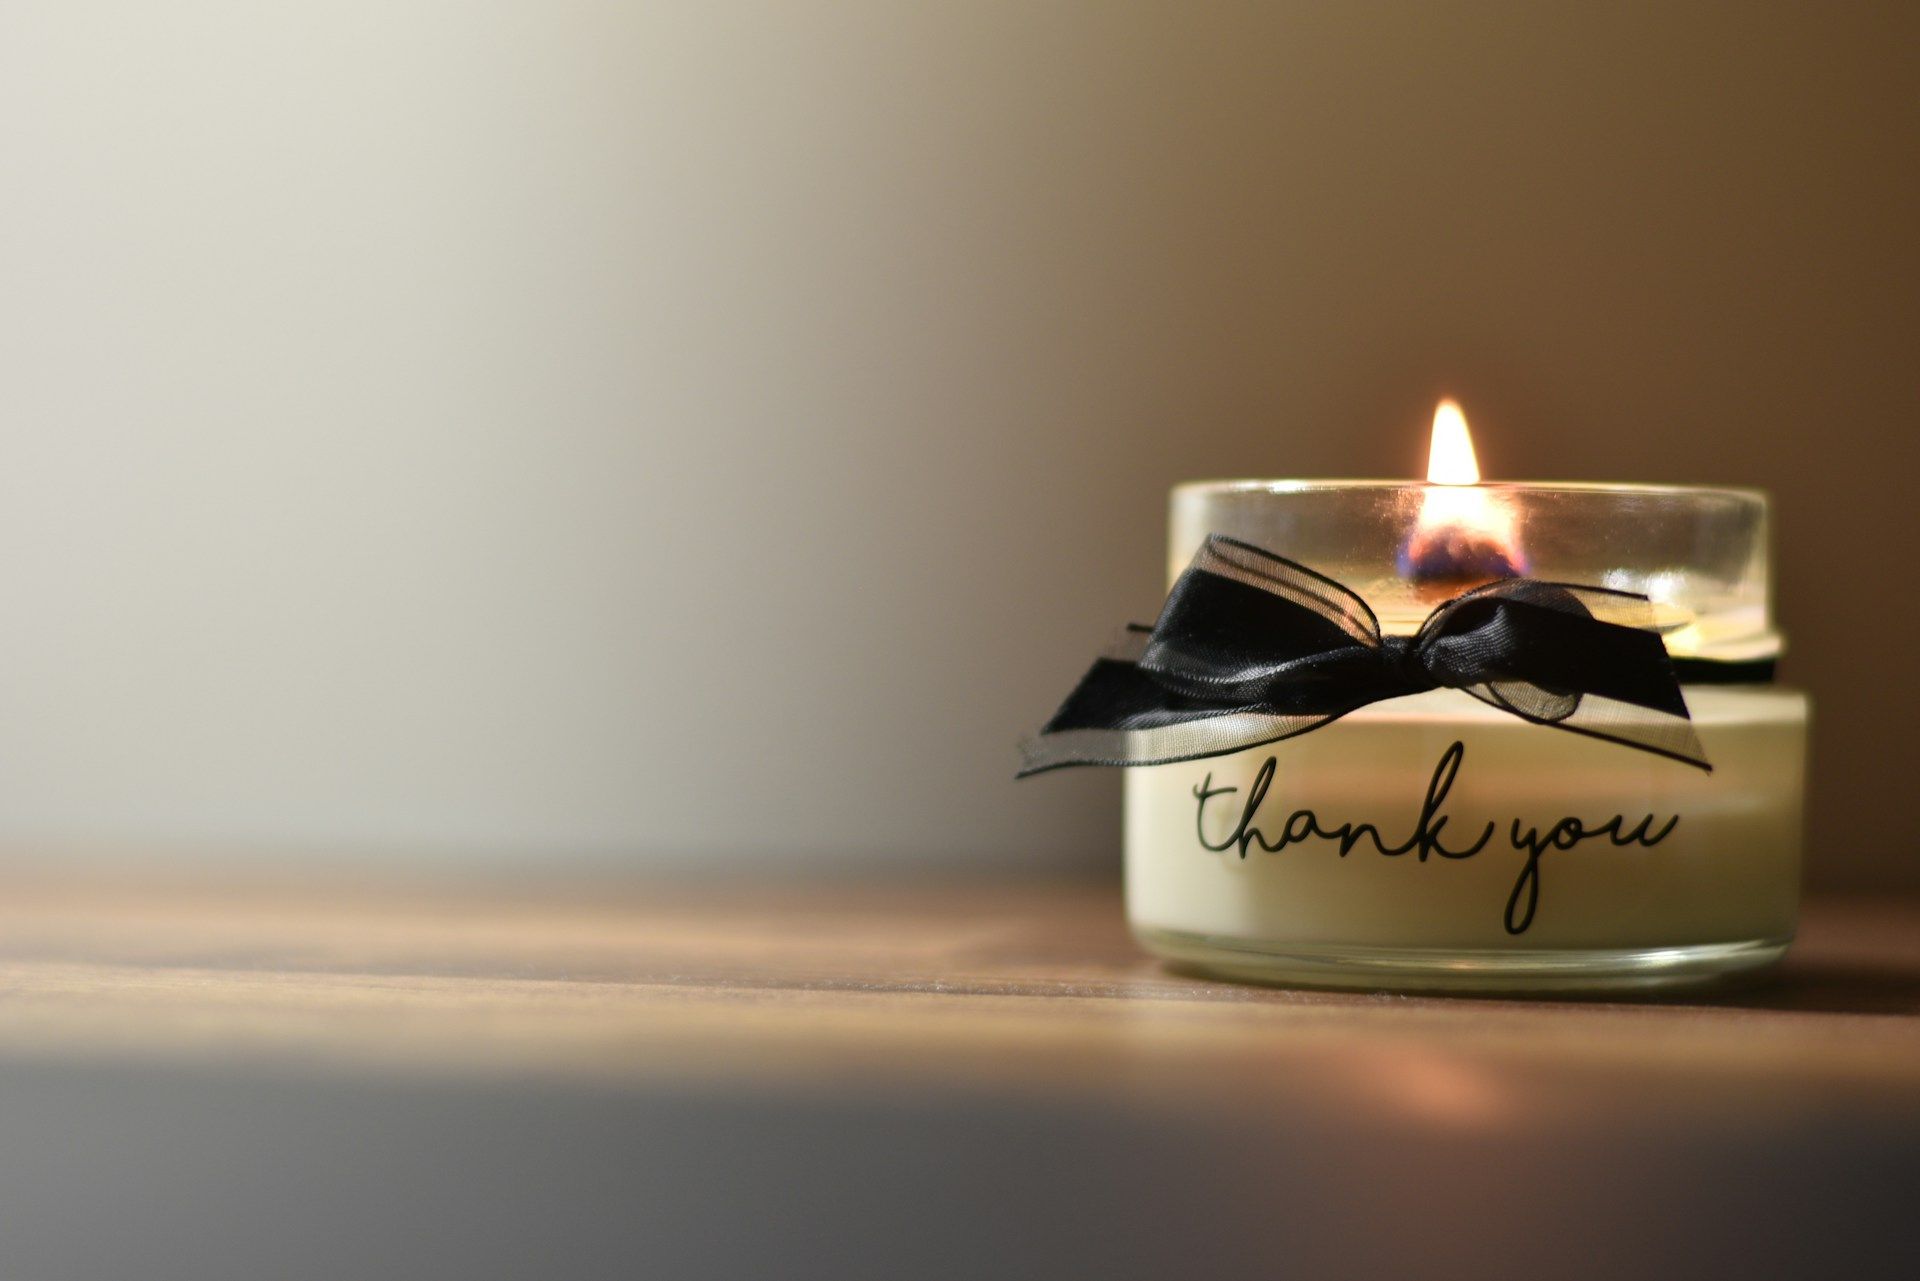 A lit candle in a glass jar with a black ribbon and “thank you” written on it, placed on a wooden surface with a soft gradient background.